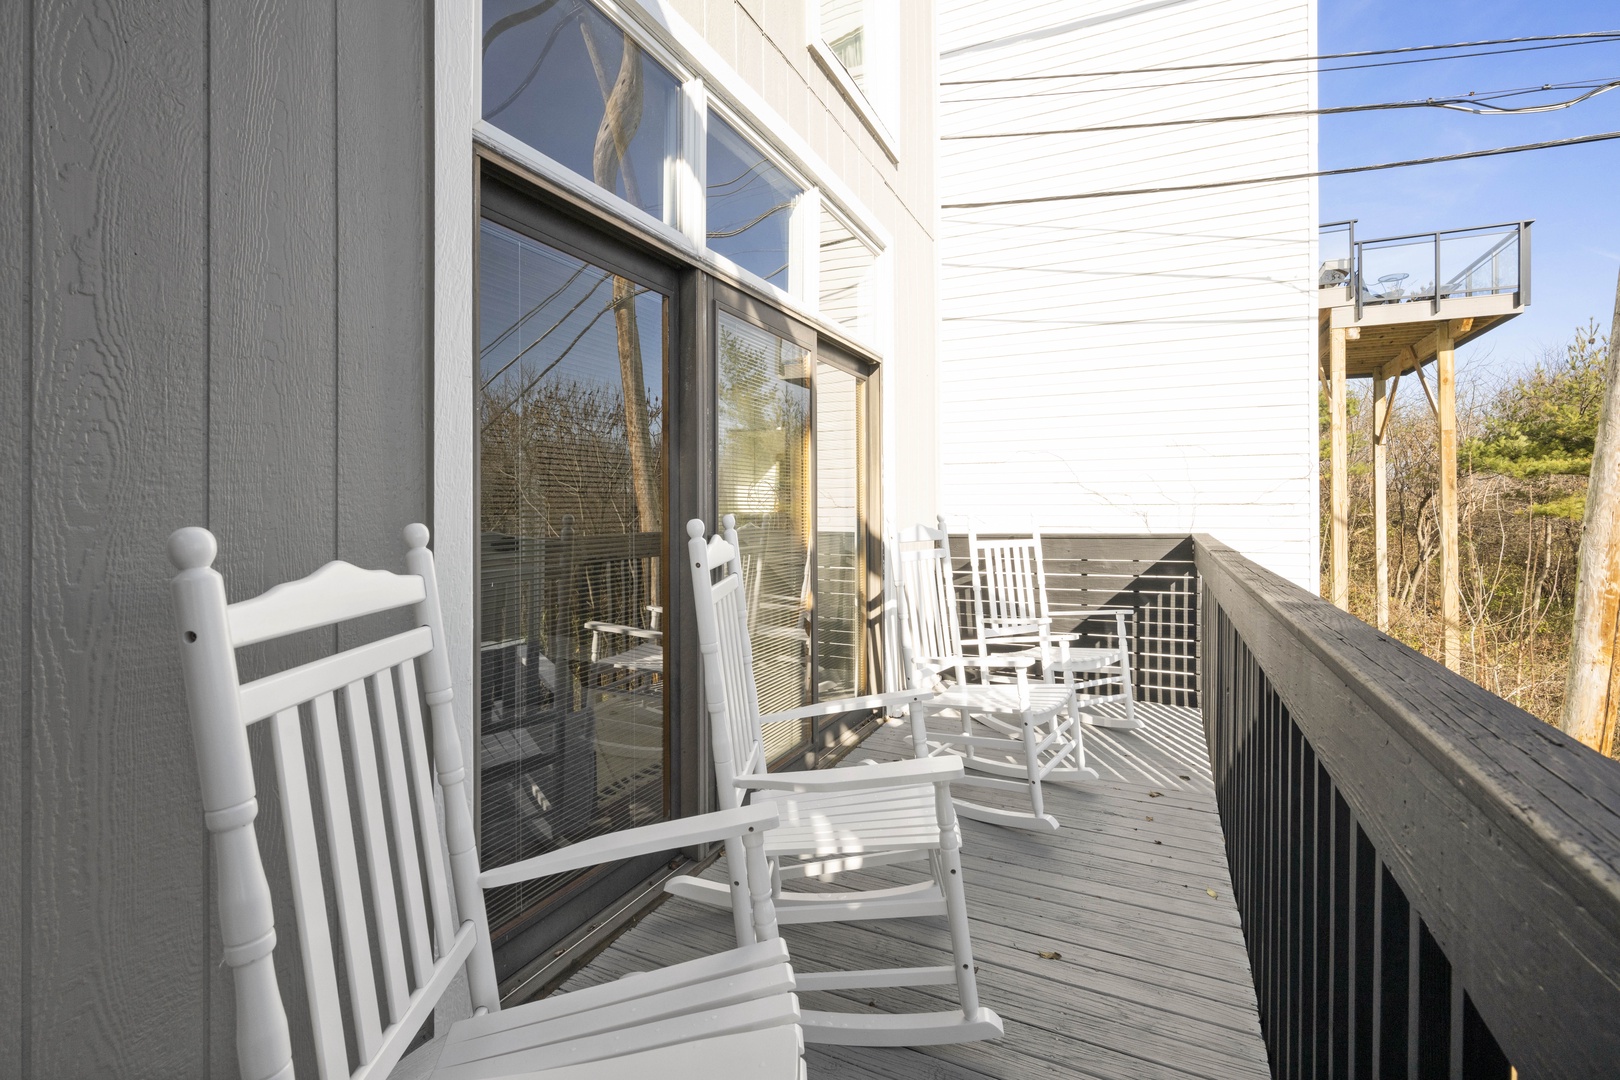 Balcony with outdoor rocking chairs